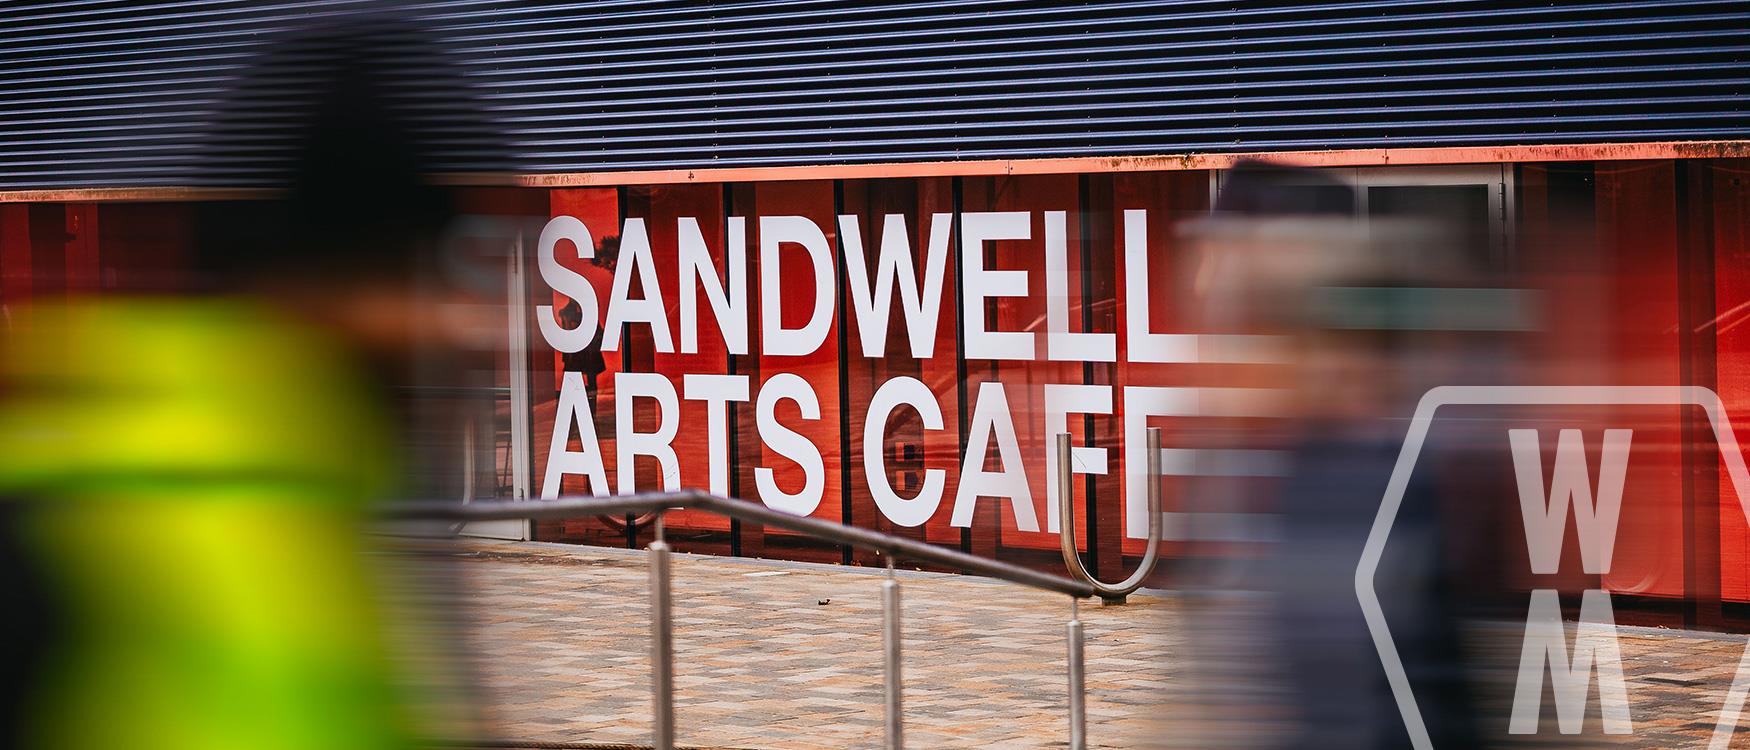 The Arts Cafe